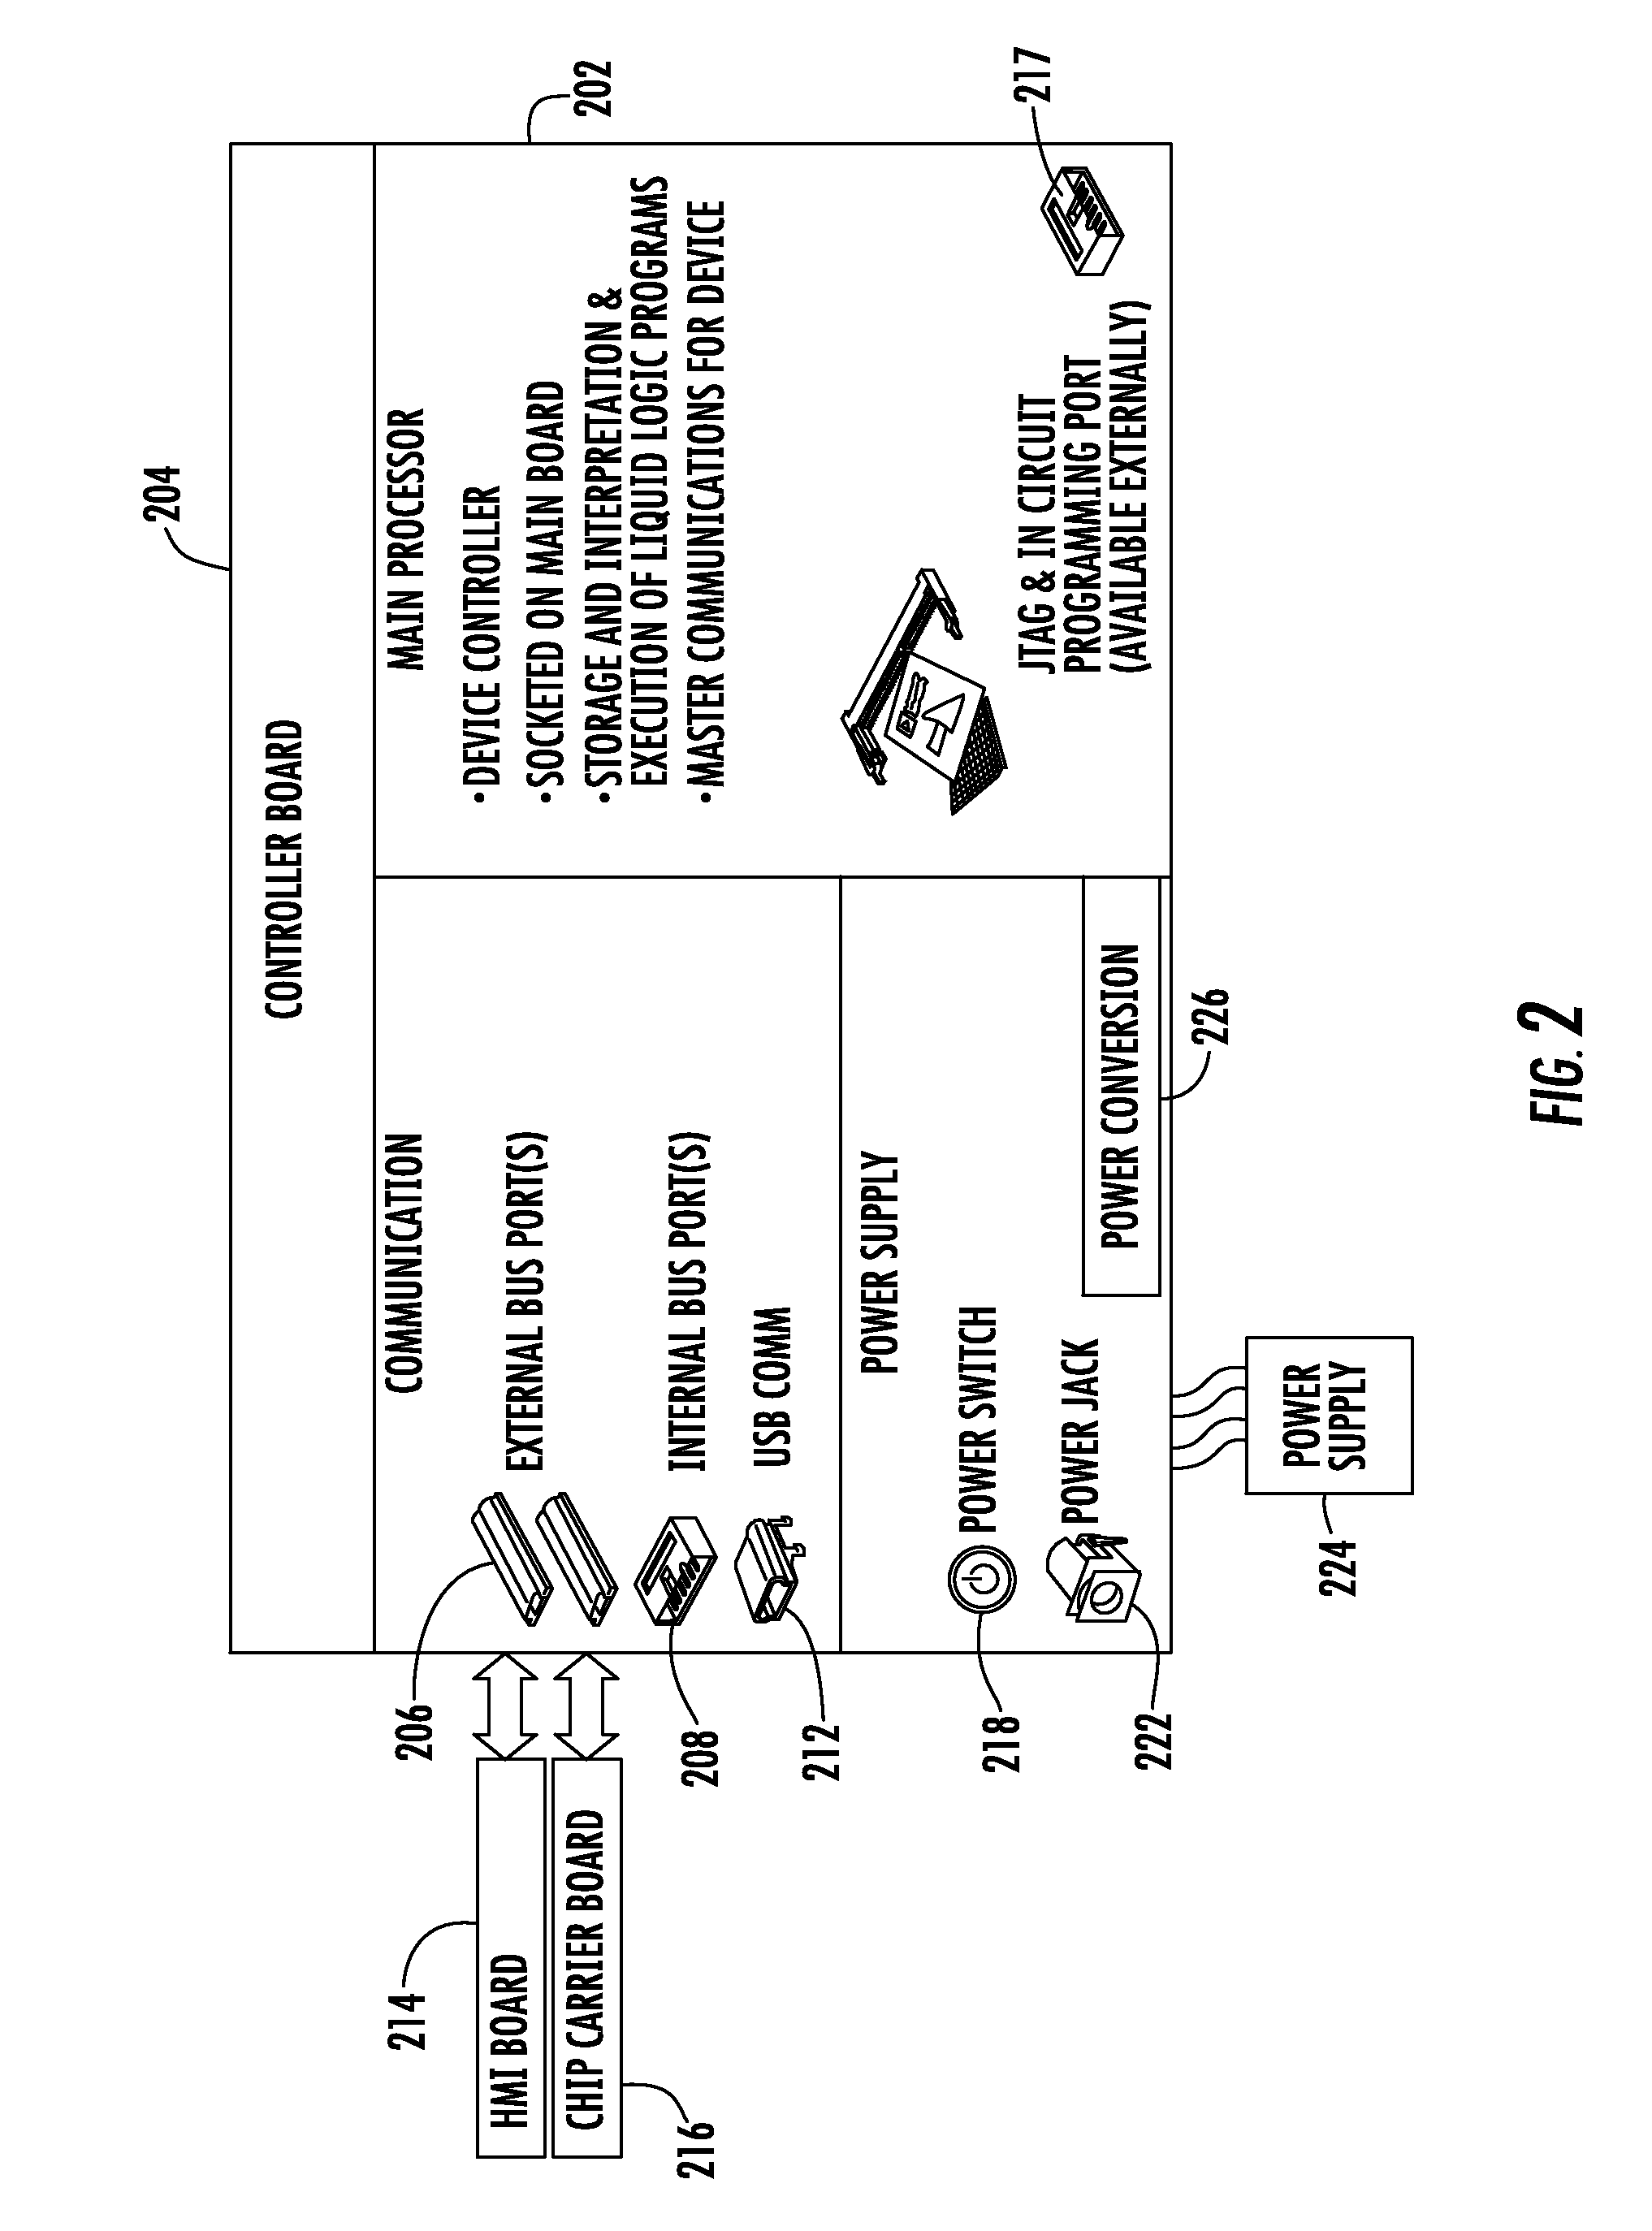 Systems, methods, and products for graphically illustrating and controlling a droplet actuator